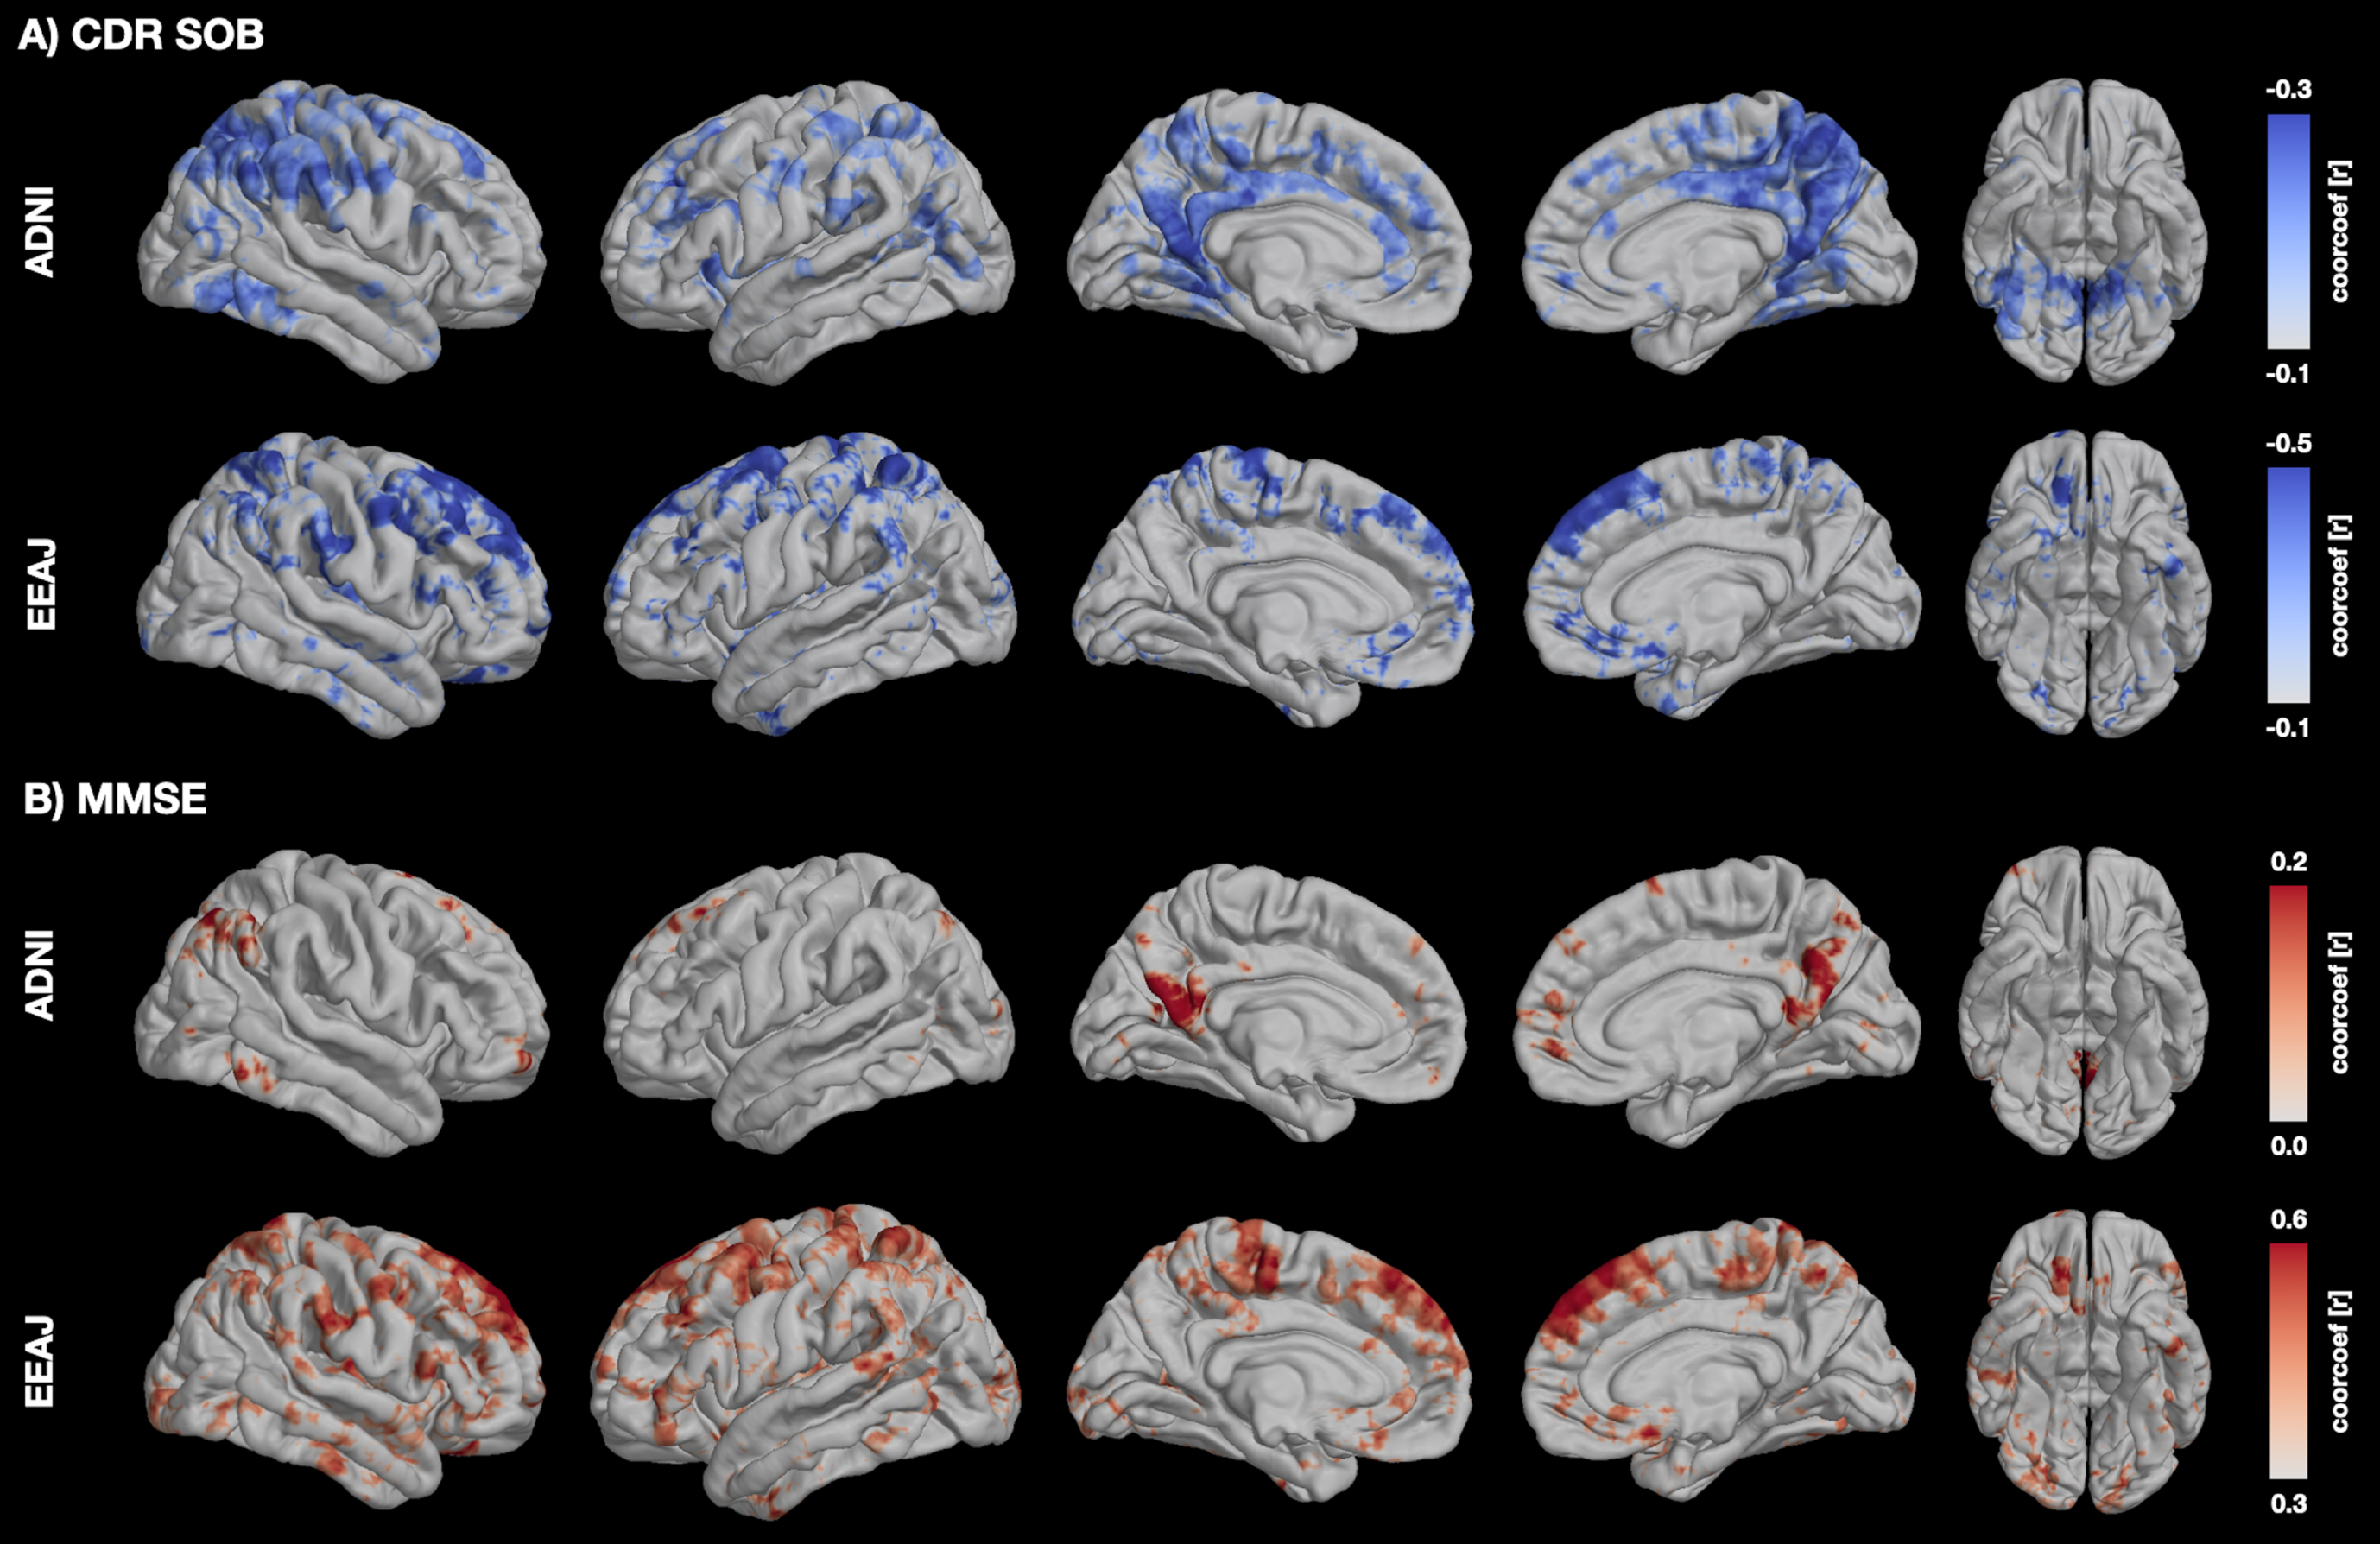 Voxel-wise correlation maps visualizing the association between fMRI complexity and MMSE (A) and CDR-SOB (B) in each cohort. MMSE, Mini-Mental State Exam; CDR-SOB, Cognitive Dementia Rating Sums of Boxes.